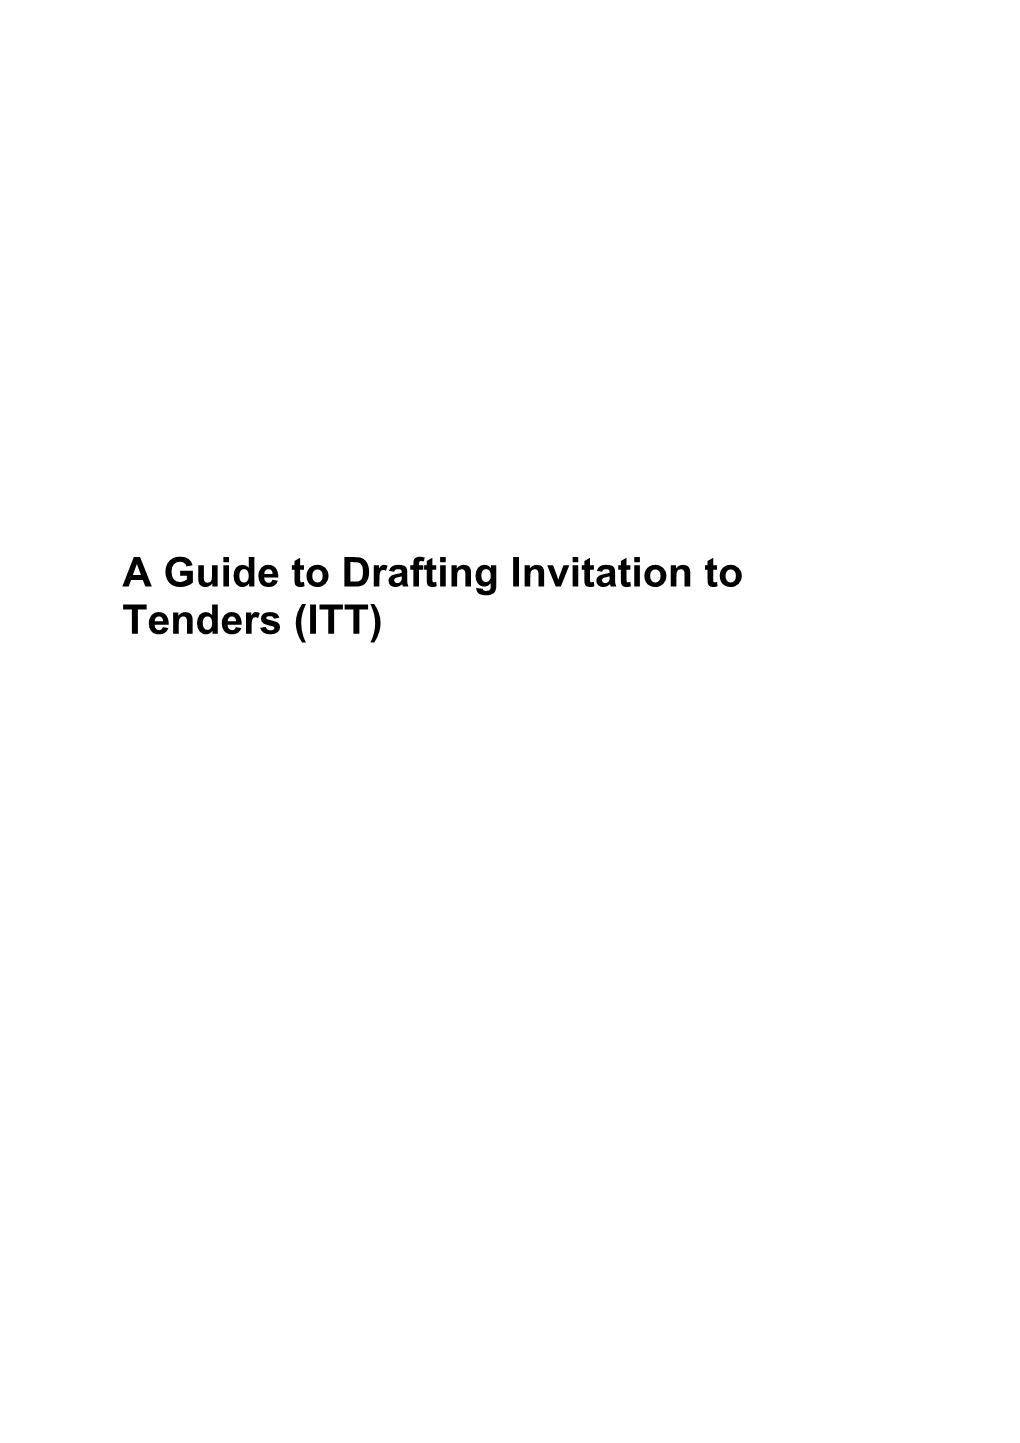 A Guide to Drafting Invitation to Tenders (ITT)